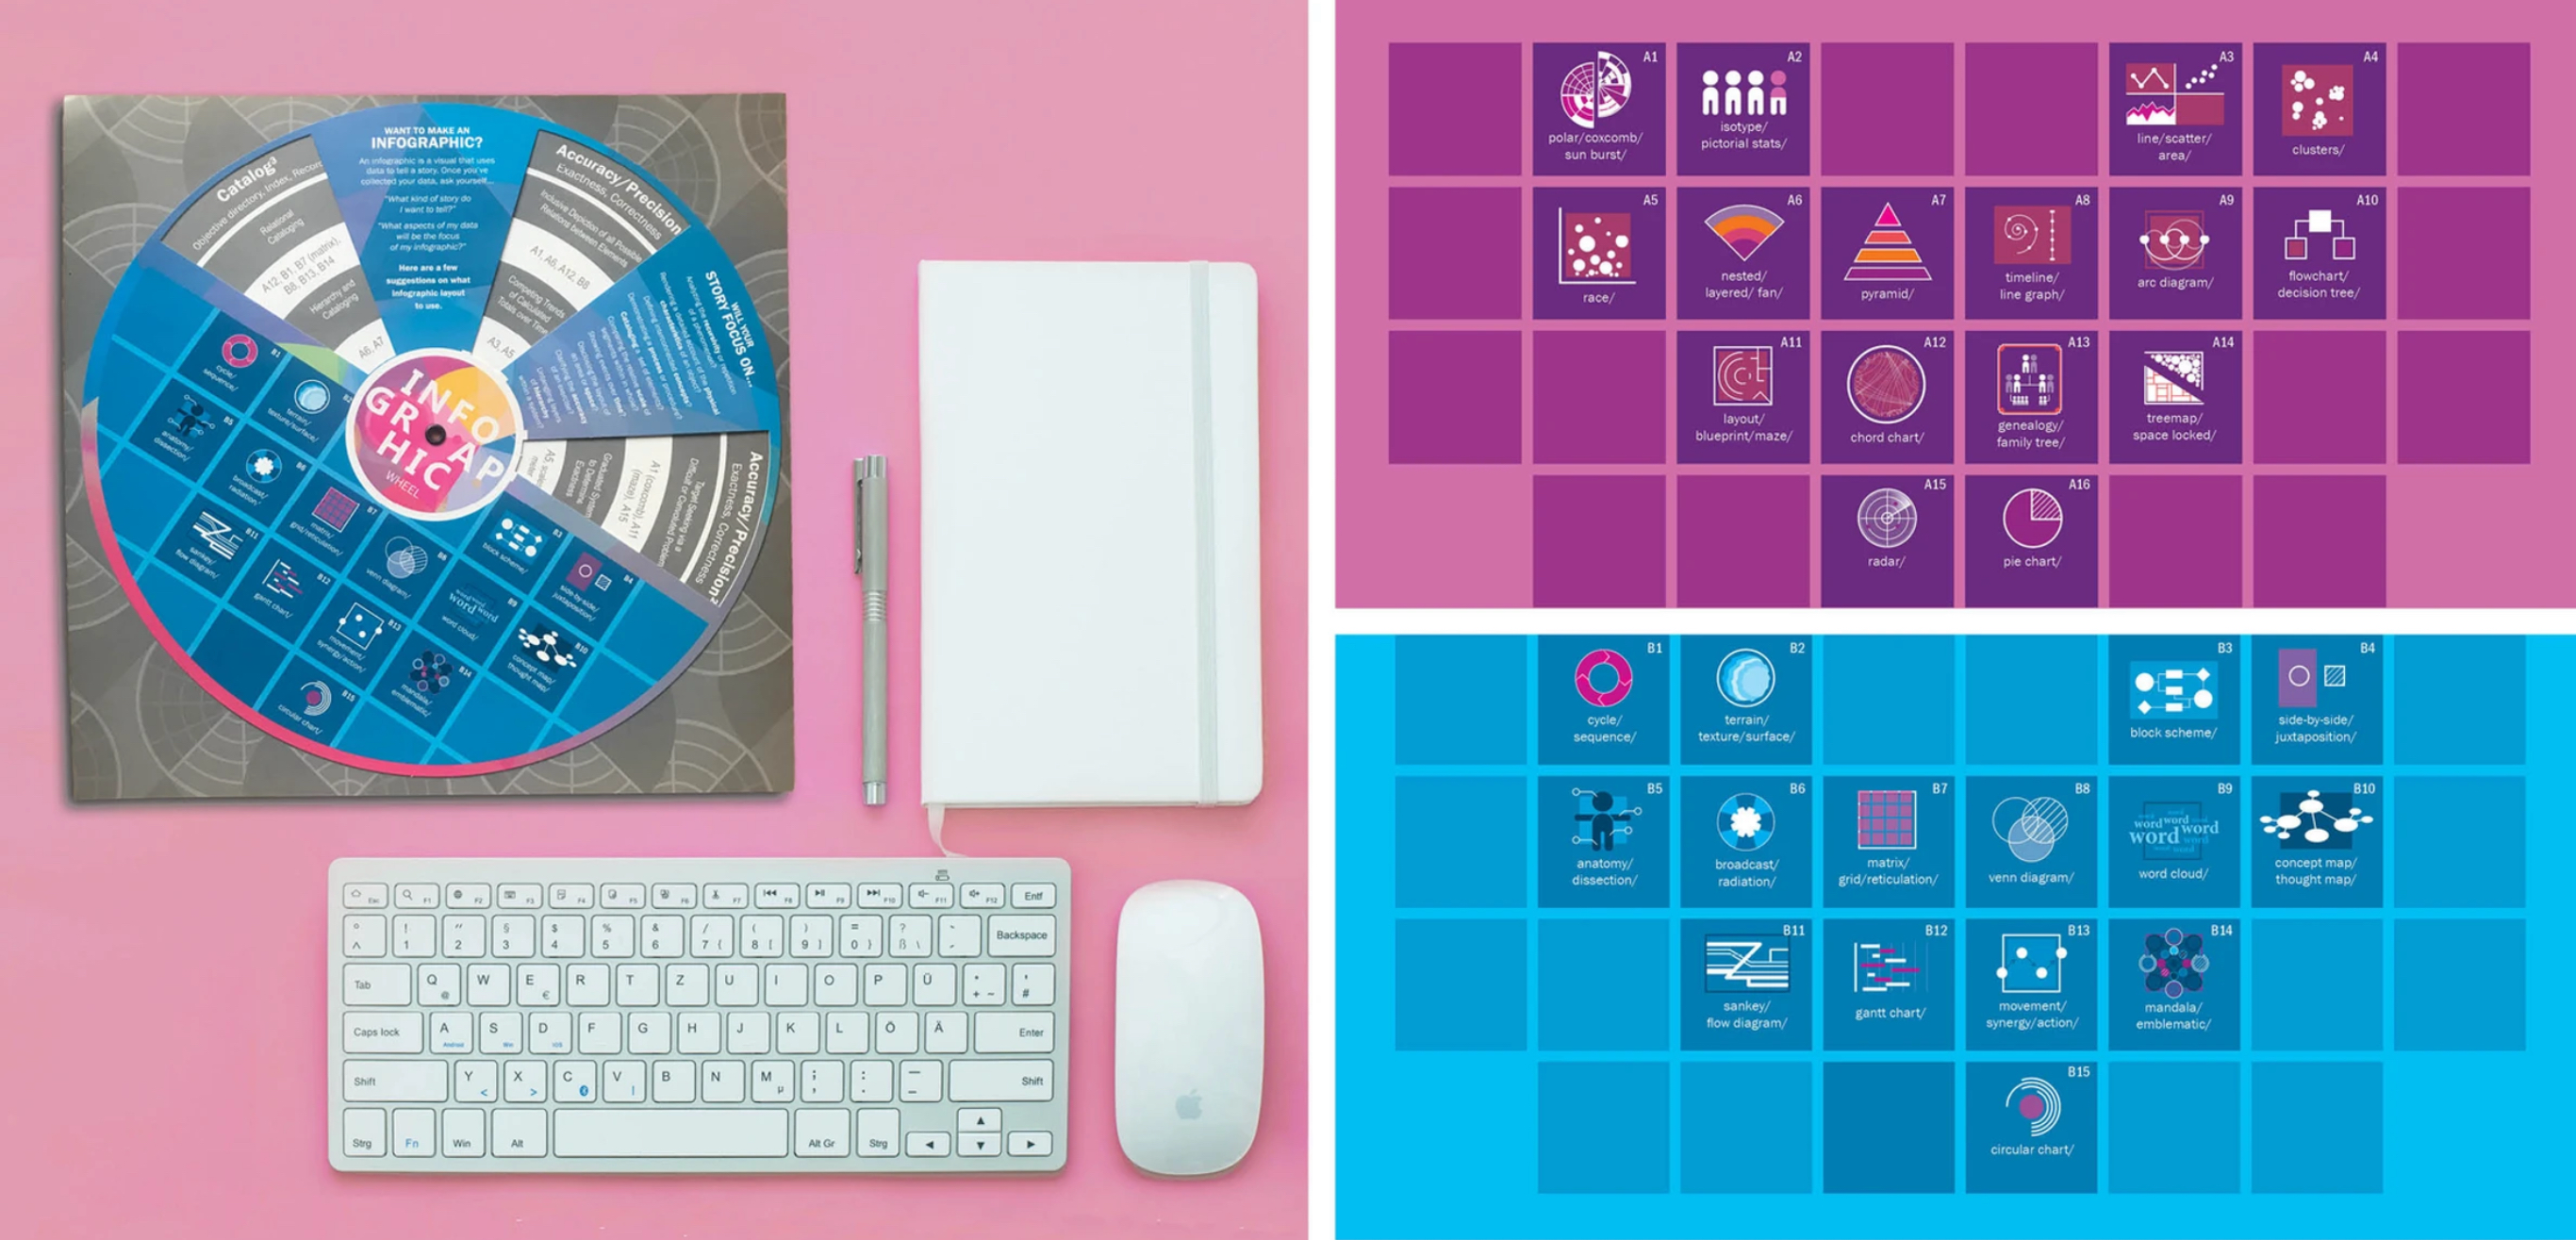 A graphic with the left side being a infographic wheel, keyboard, mouse, notebook and pen on a pink background. On the right, there are two grids with infographic elements in the shape of a heart.